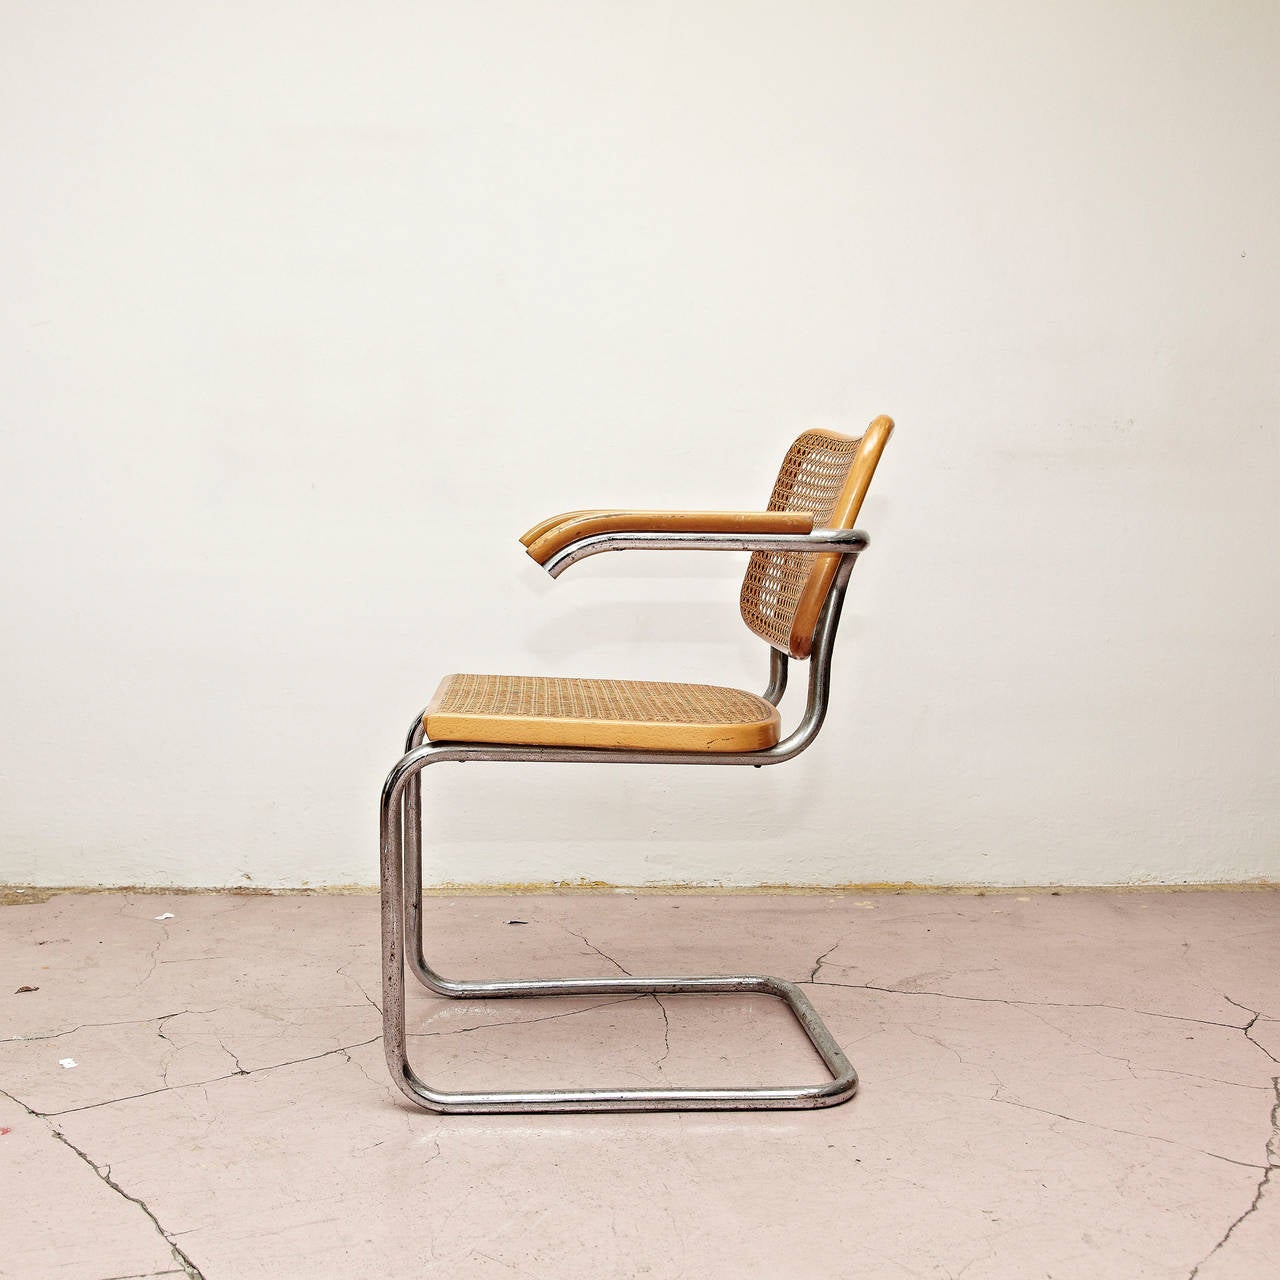 Chair, model Cesca, designed by Marcel Breuer around 1970, manufactured in Italy.
Metal pipe frame, wood seat and back structure and rattan.

 In good original condition, with minor wear consistent with age and use, preserving a beautiful